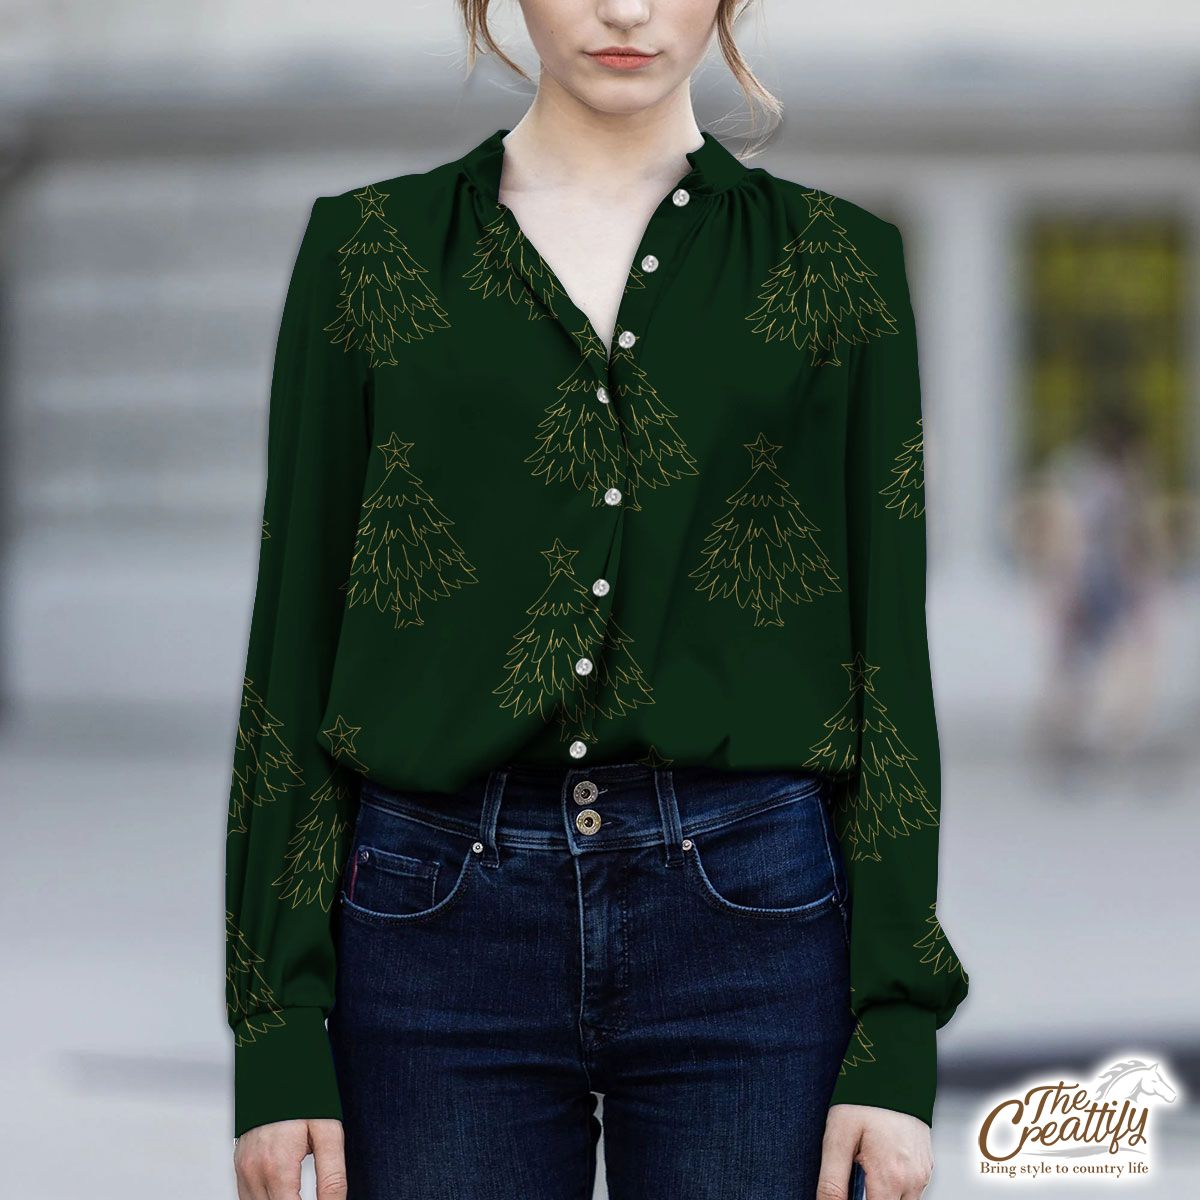 Gold And Green Christmas Tree V-Neckline Blouses